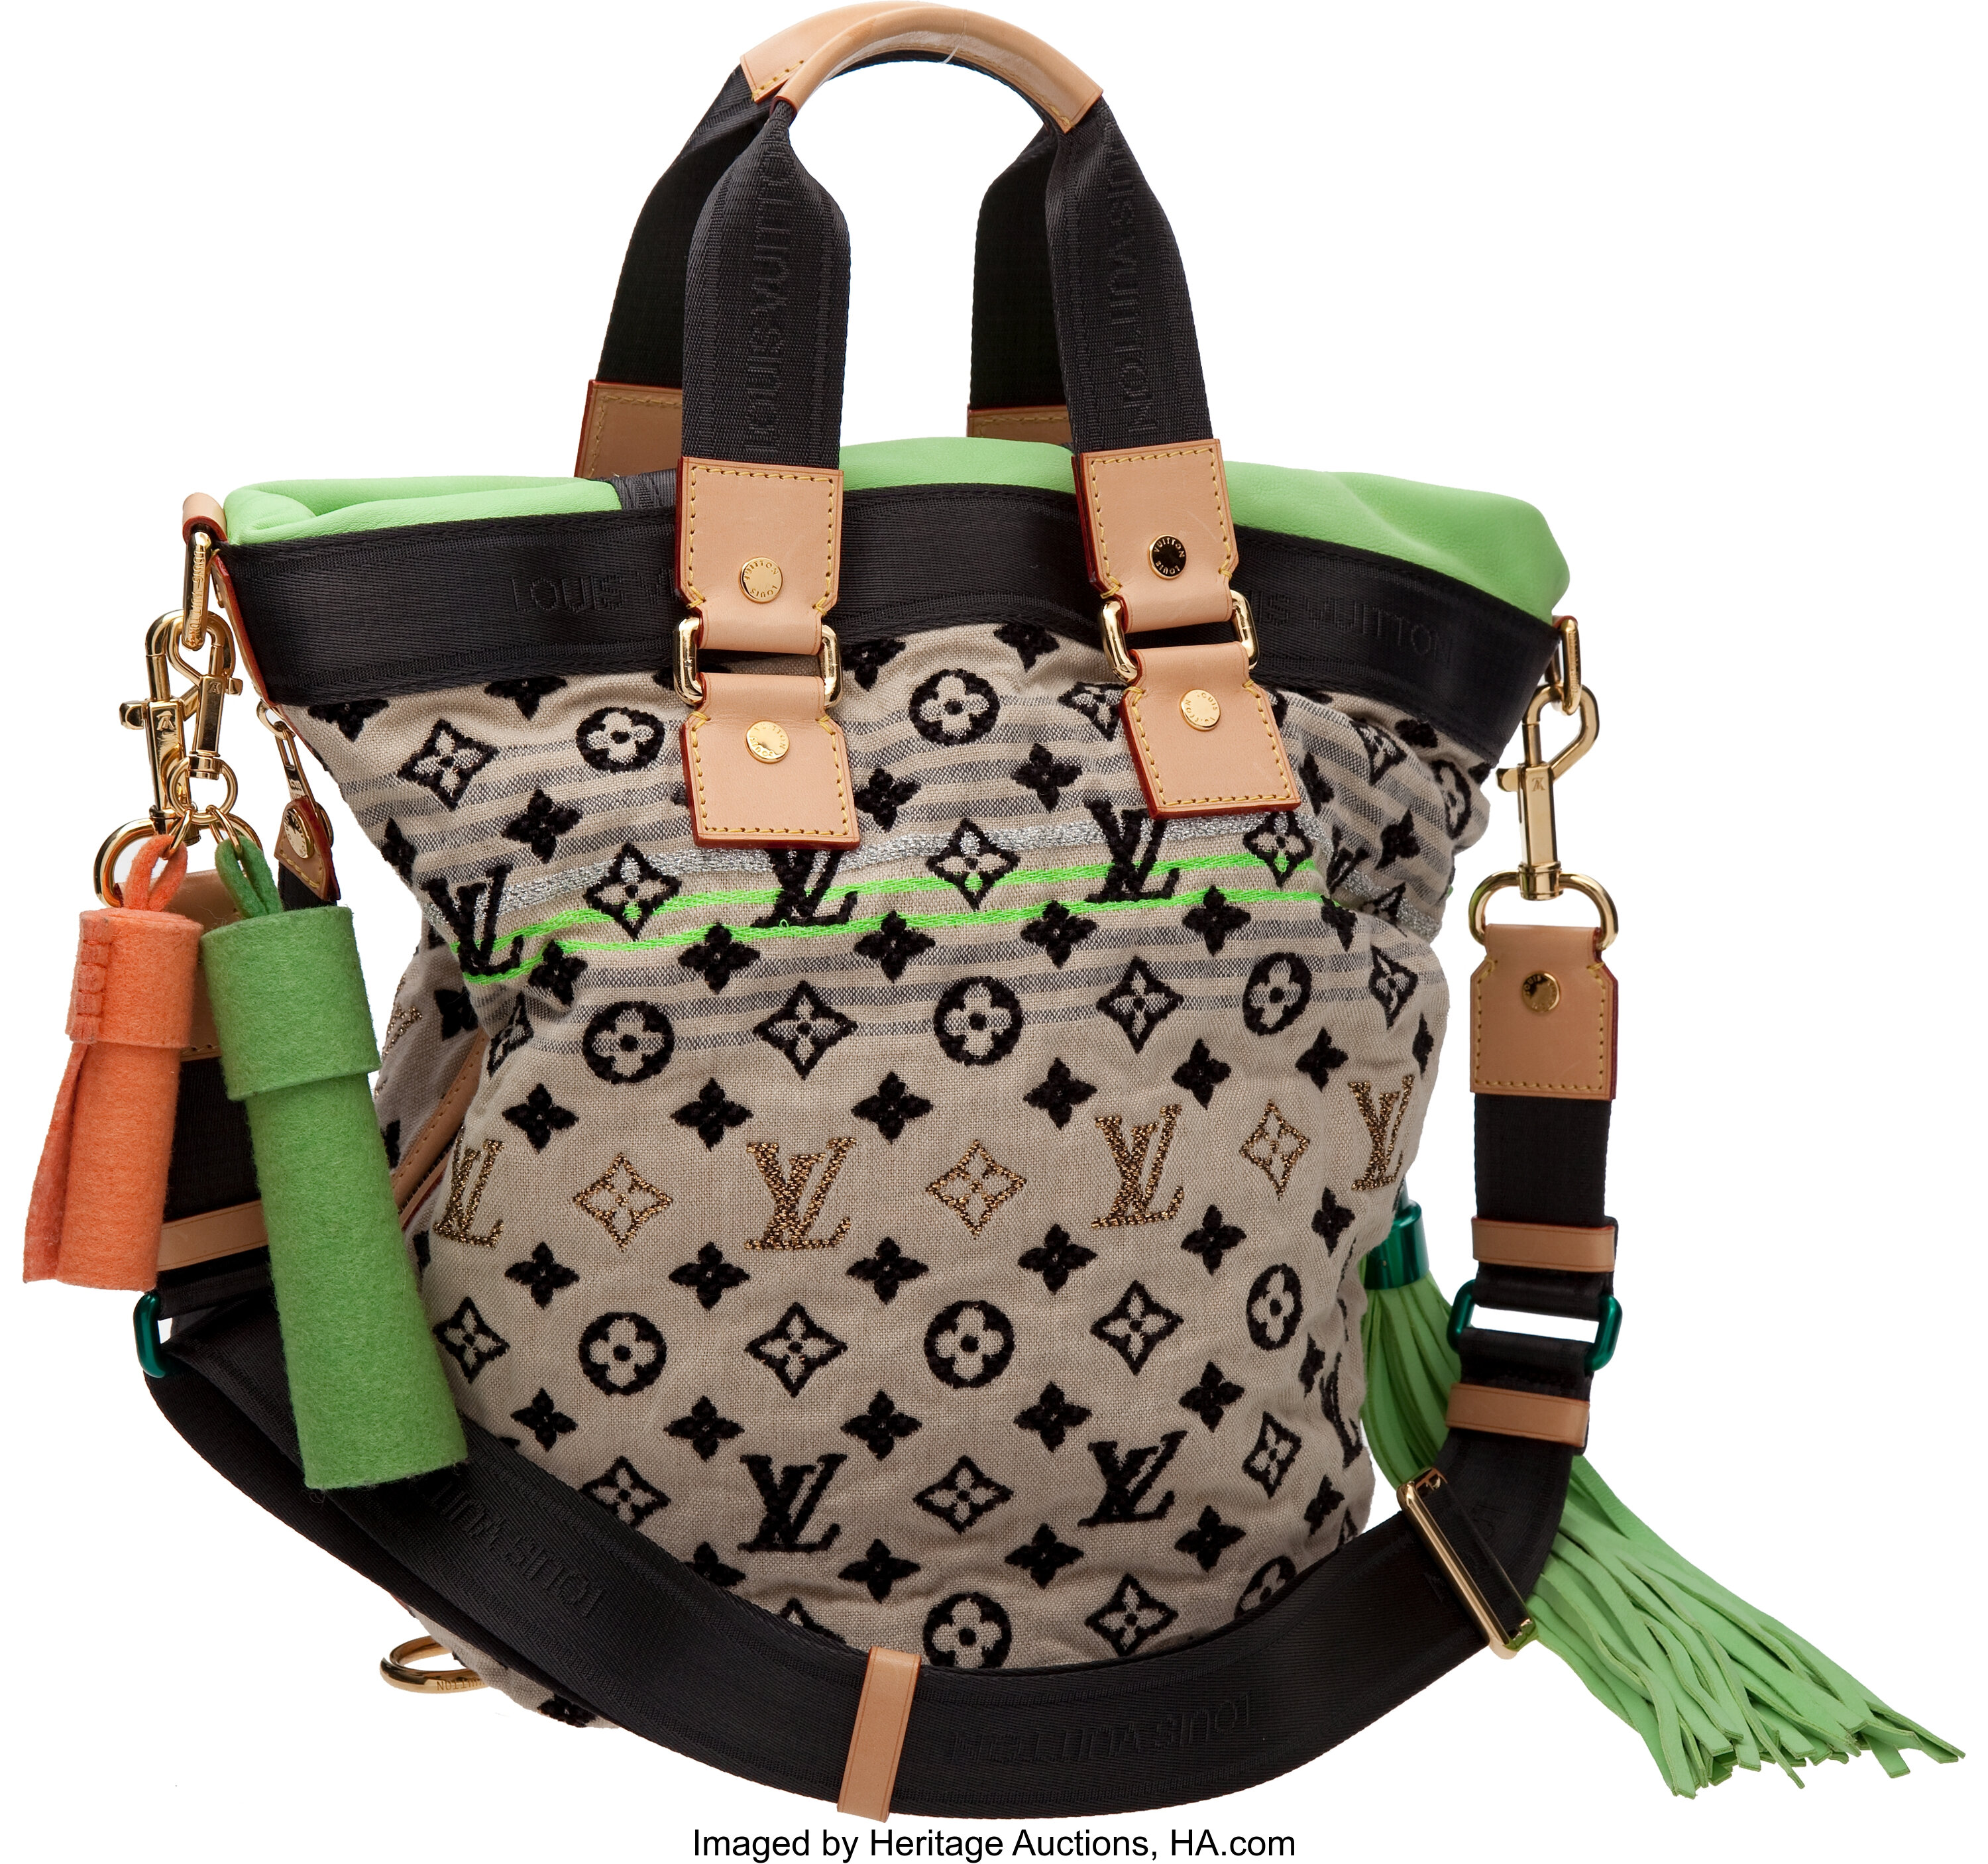 New Arrivals! – Tagged Upcycled Louis Vuitton – The Boujee Gypsy